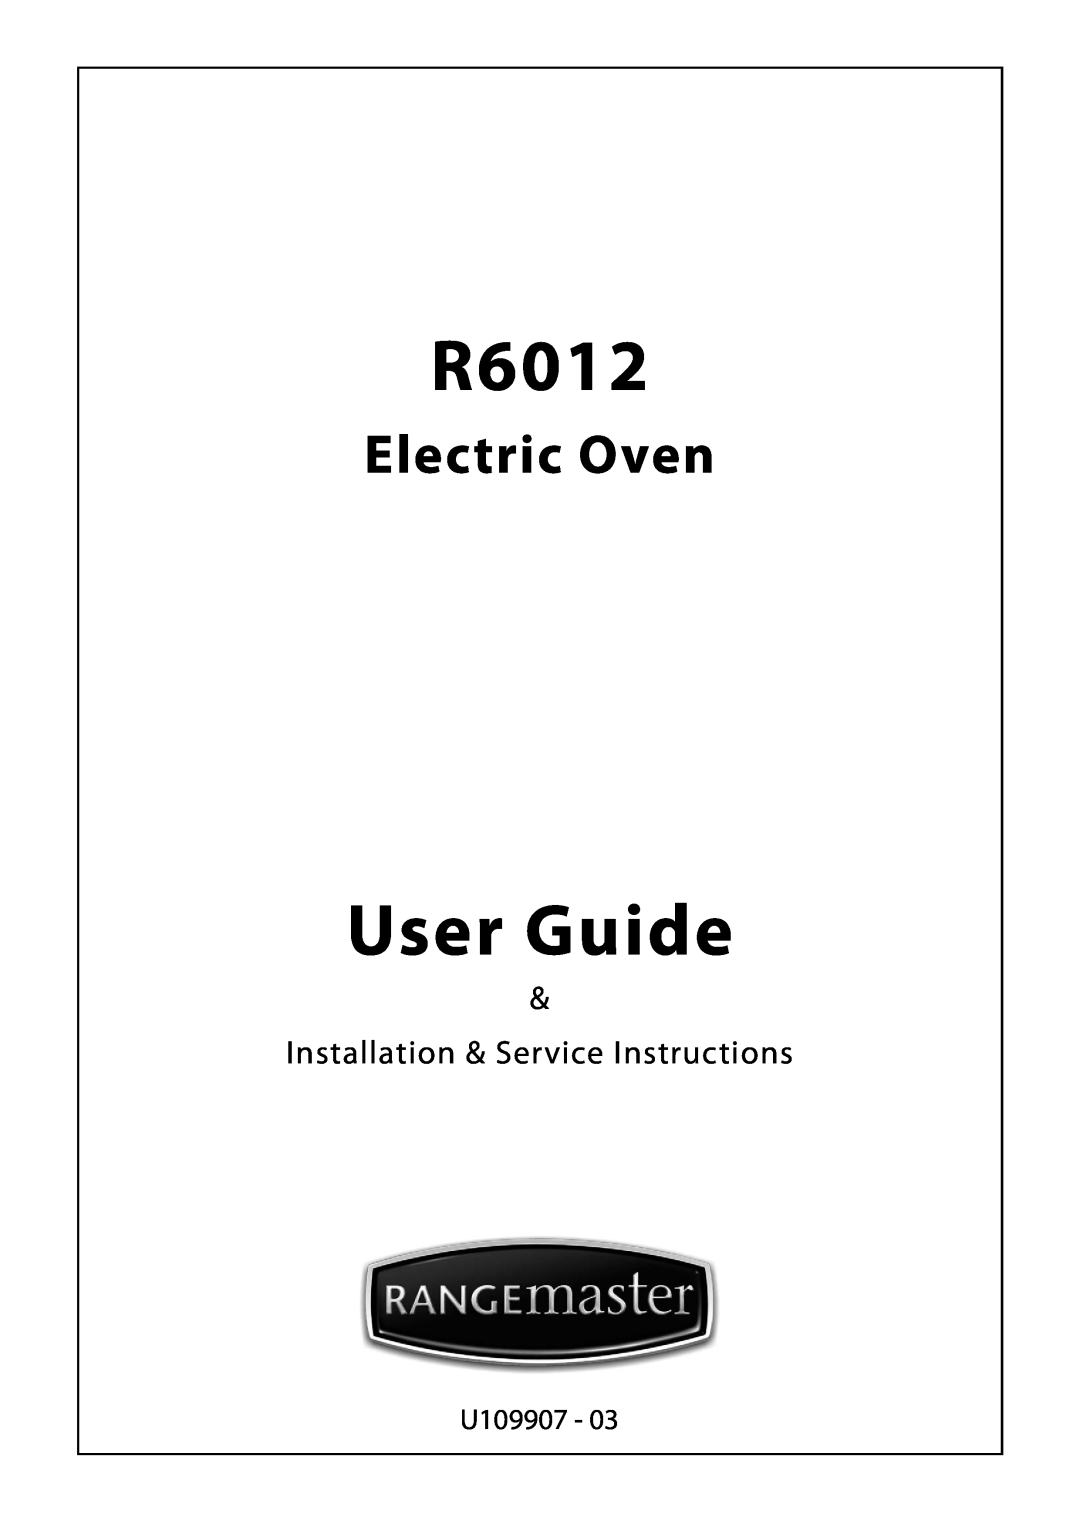 Rangemaster R6012 manual User Guide, Electric Oven, Installation & Service Instructions, U109907 